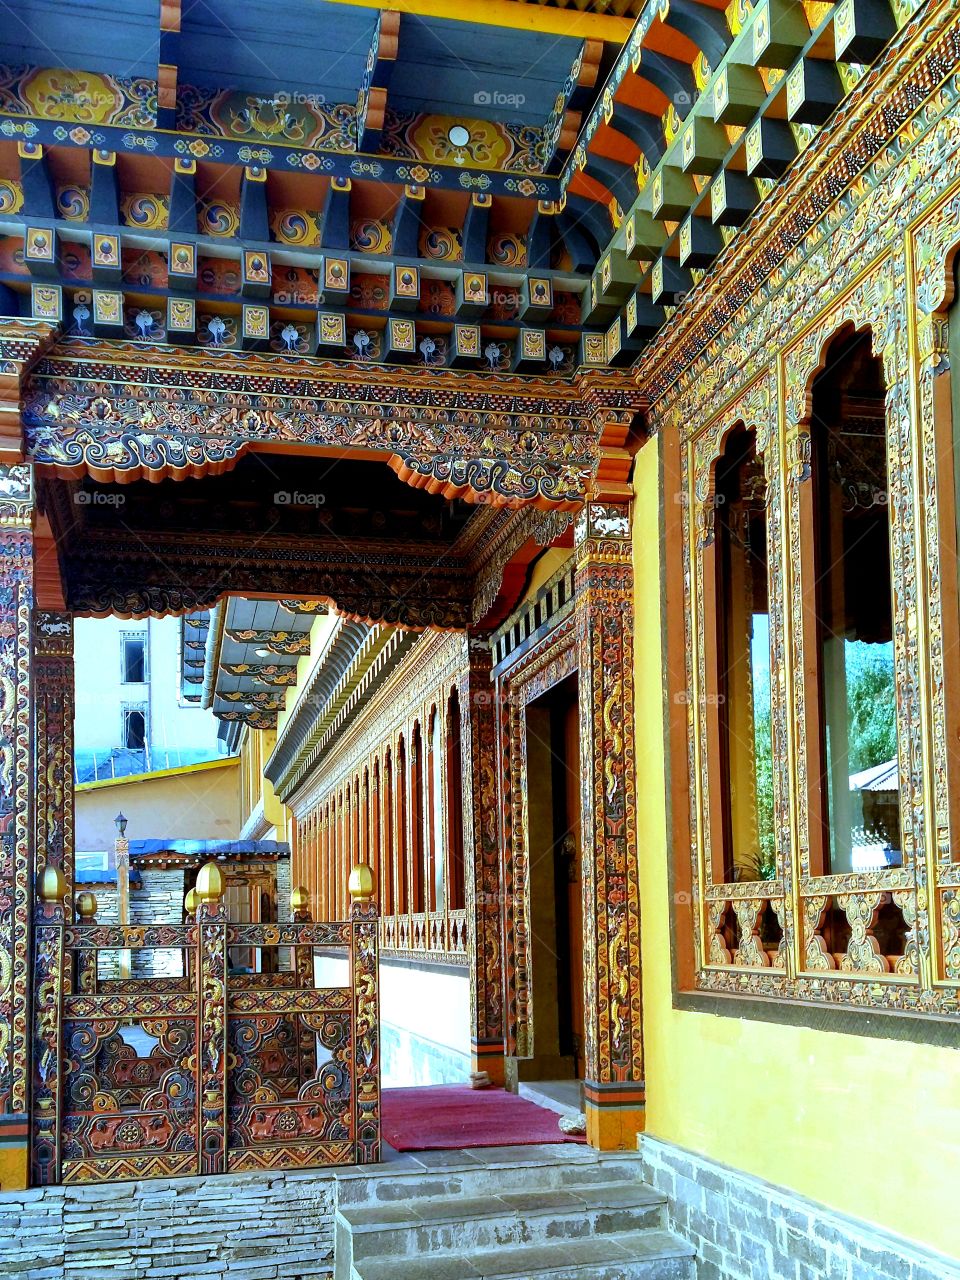 Architectural beauty of buildings in Bhutan